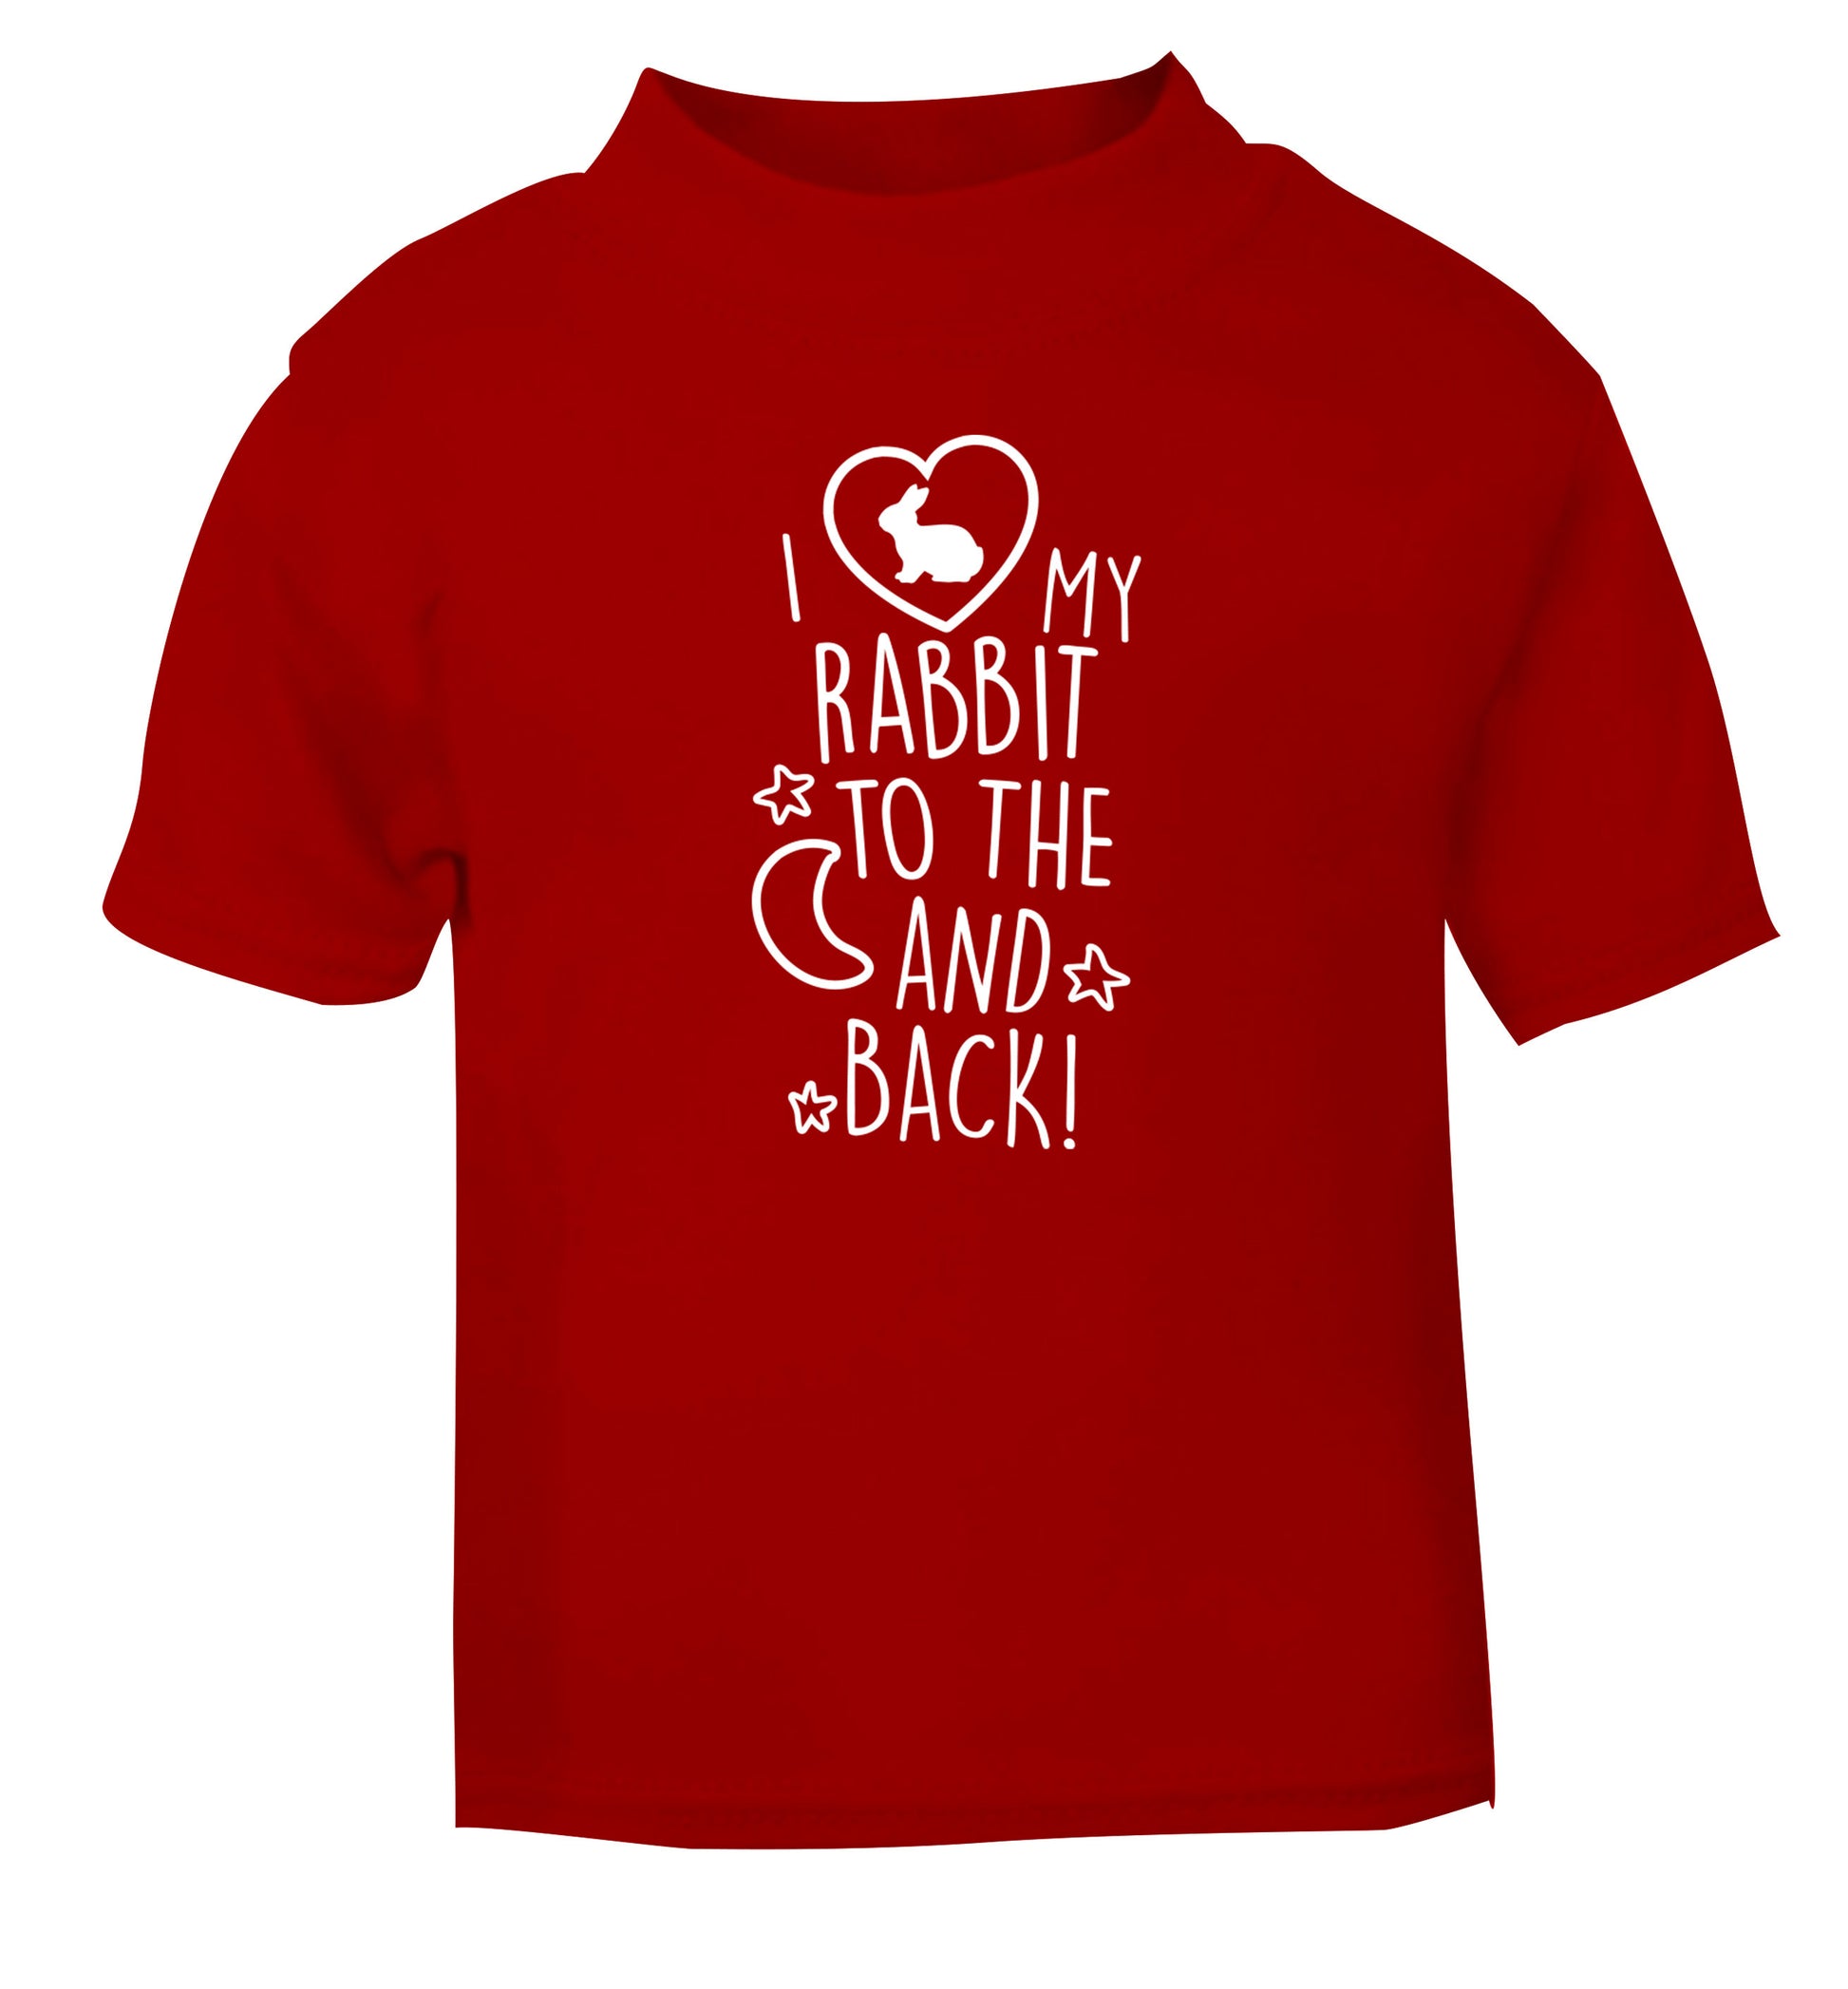 I love my rabbit to the moon and back red Baby Toddler Tshirt 2 Years